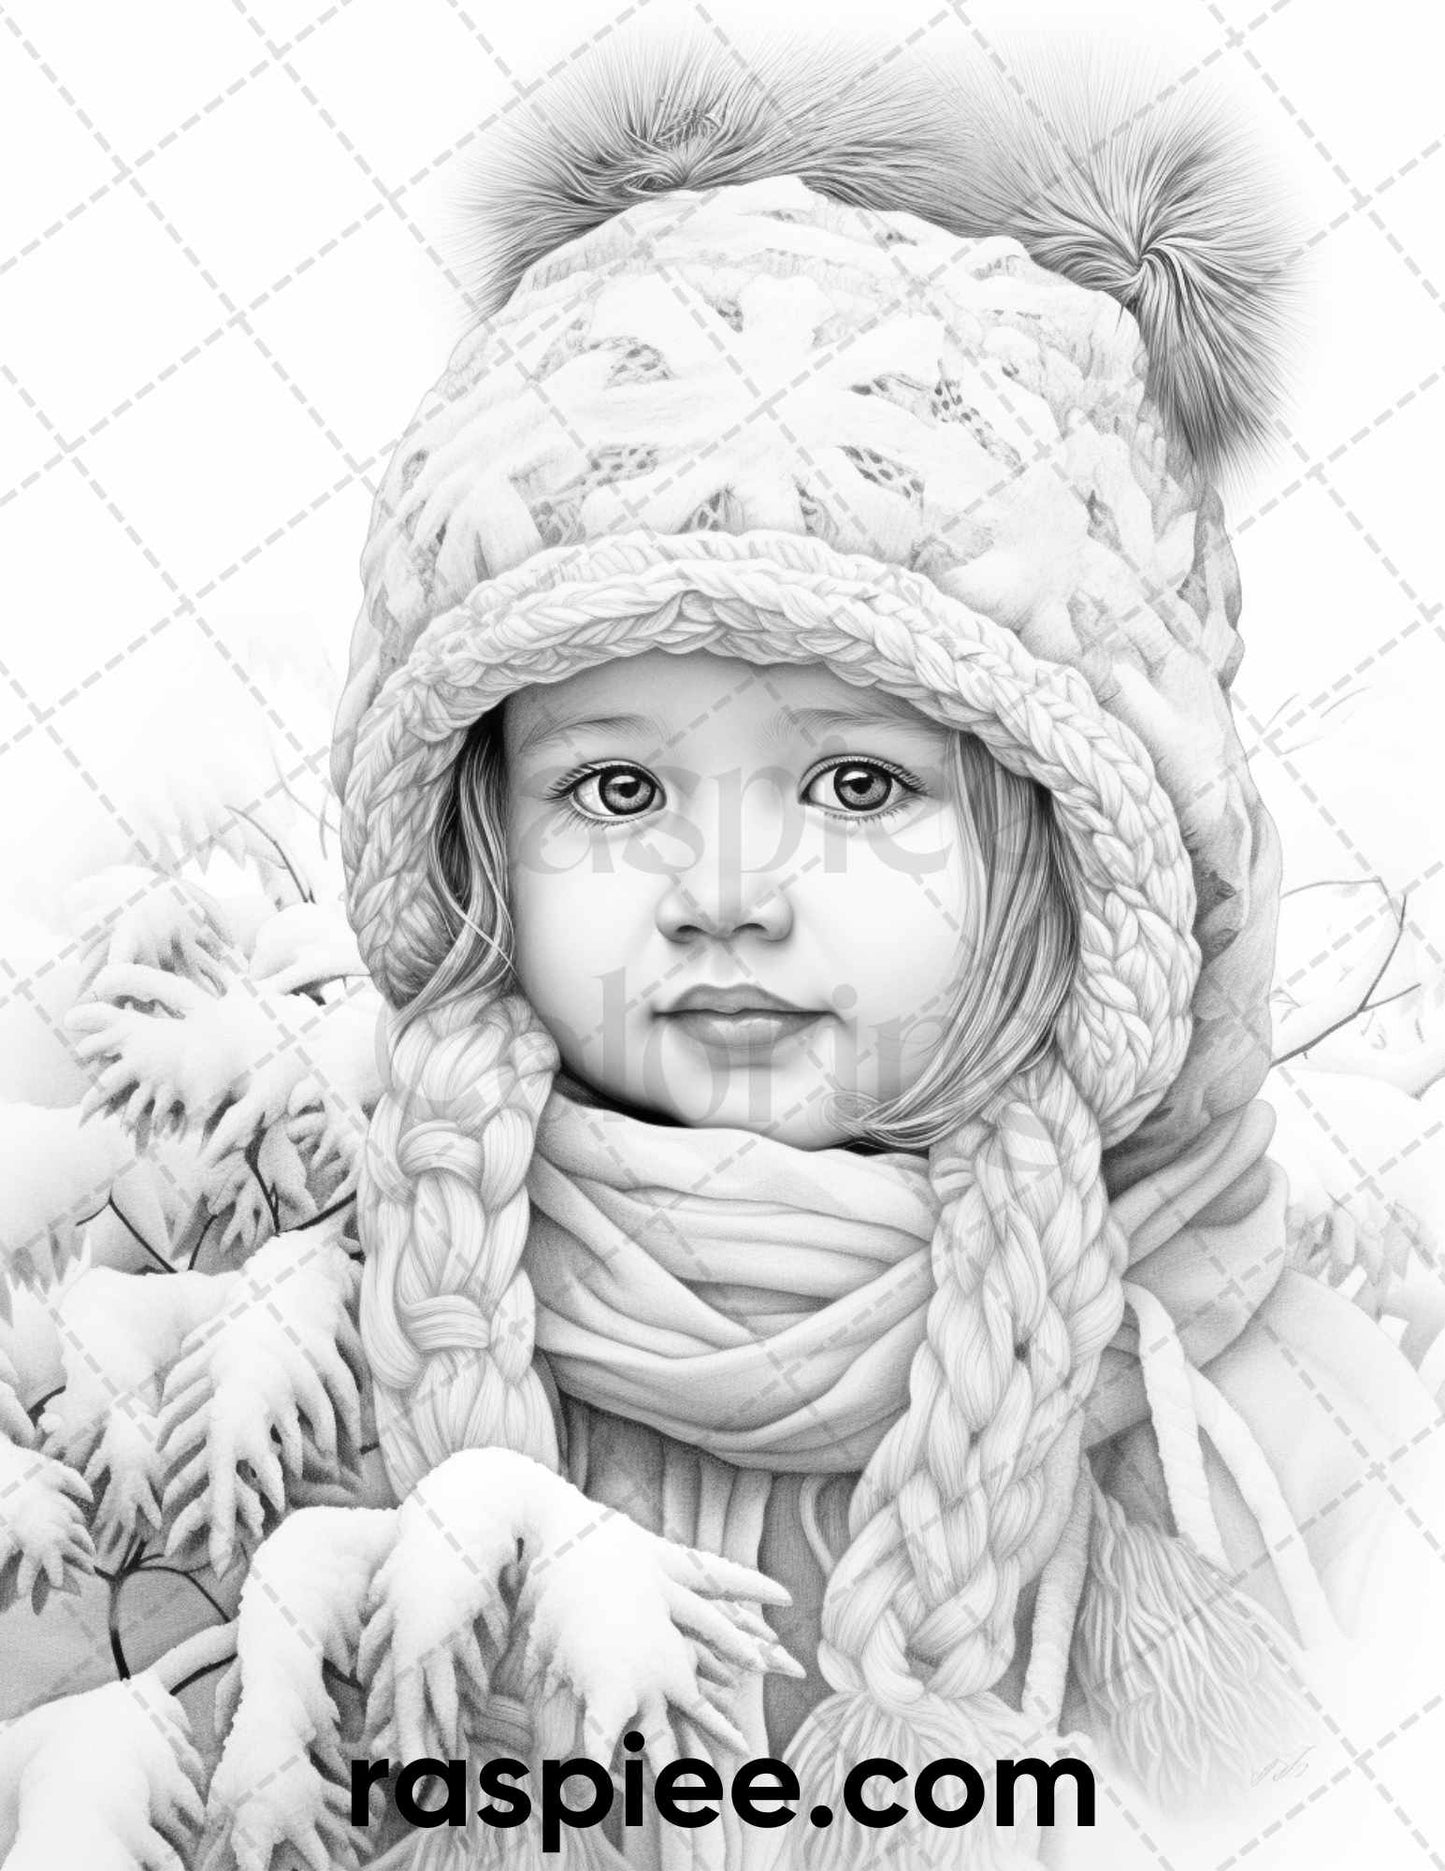 Baby Winter Portrait Coloring Page, Adult Coloring Activity, High-Quality Printable Page, Relaxing Coloring for Adults, Creative Coloring Project, Stress-Relief Coloring Page, Seasonal Coloring Fun, Winter Coloring Pages, Christmas Coloring Pages, Portrait Coloring Pages, Xmas Coloring Pages, Christmas Coloring Sheets